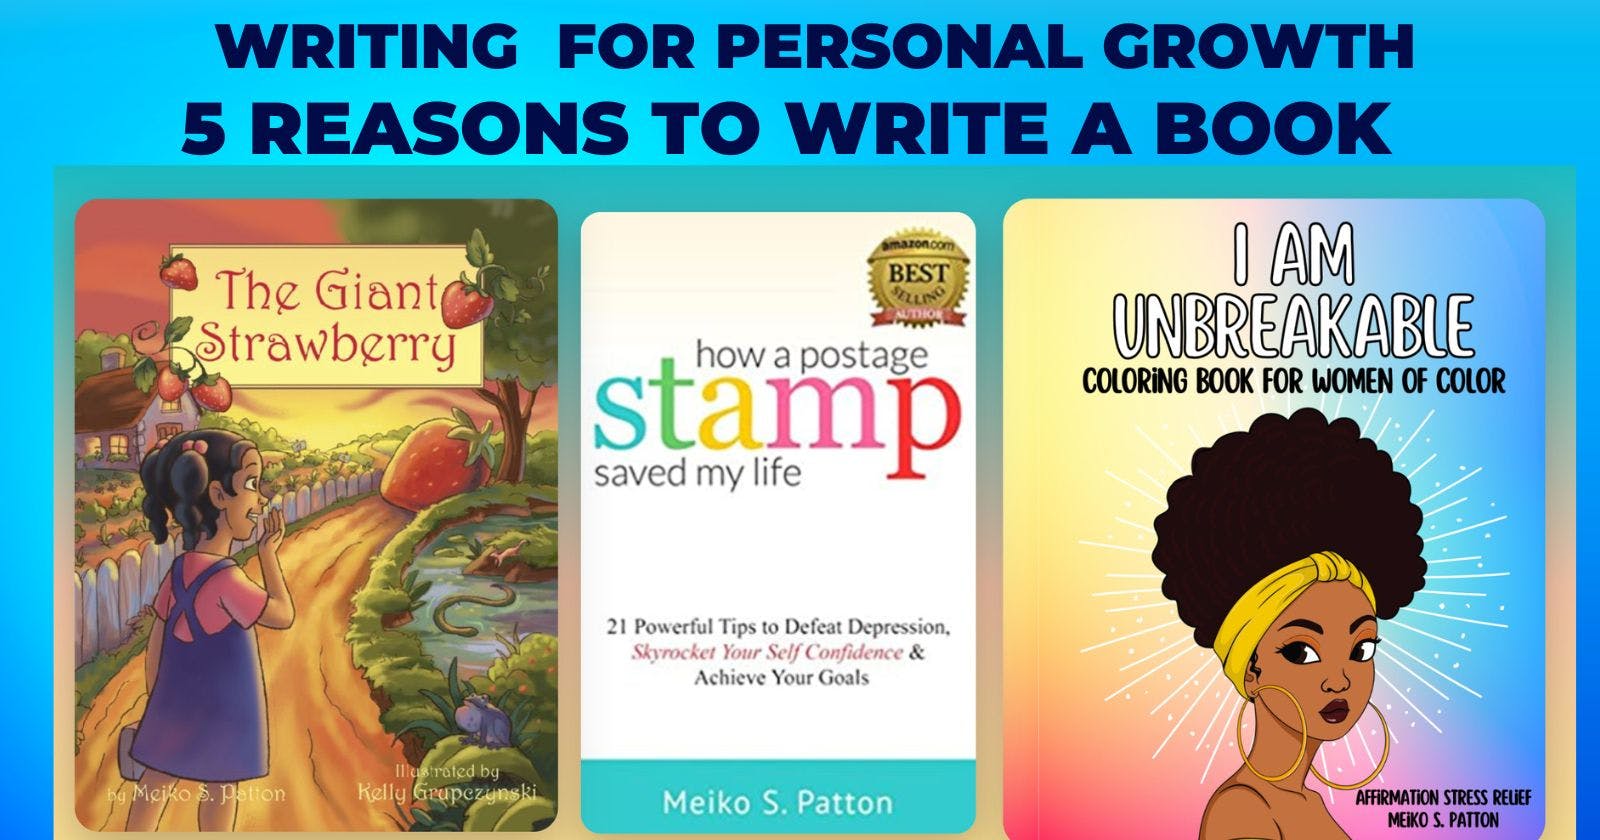 Writing a Book for Self-Reflection and Personal Growth